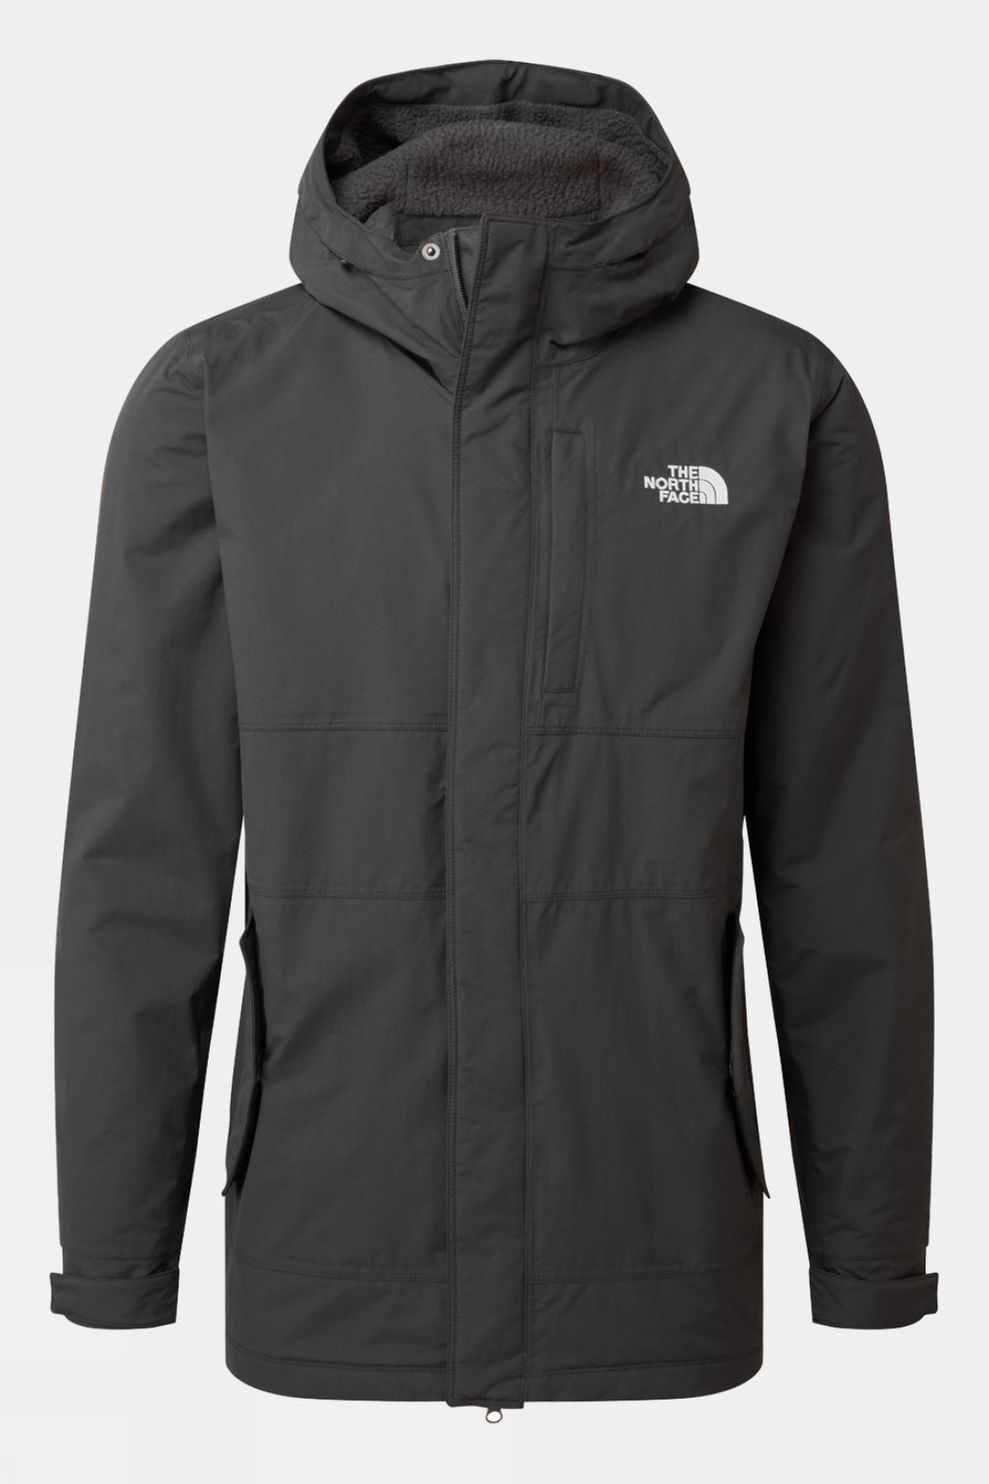 The North Face Mens Meridian Jacket